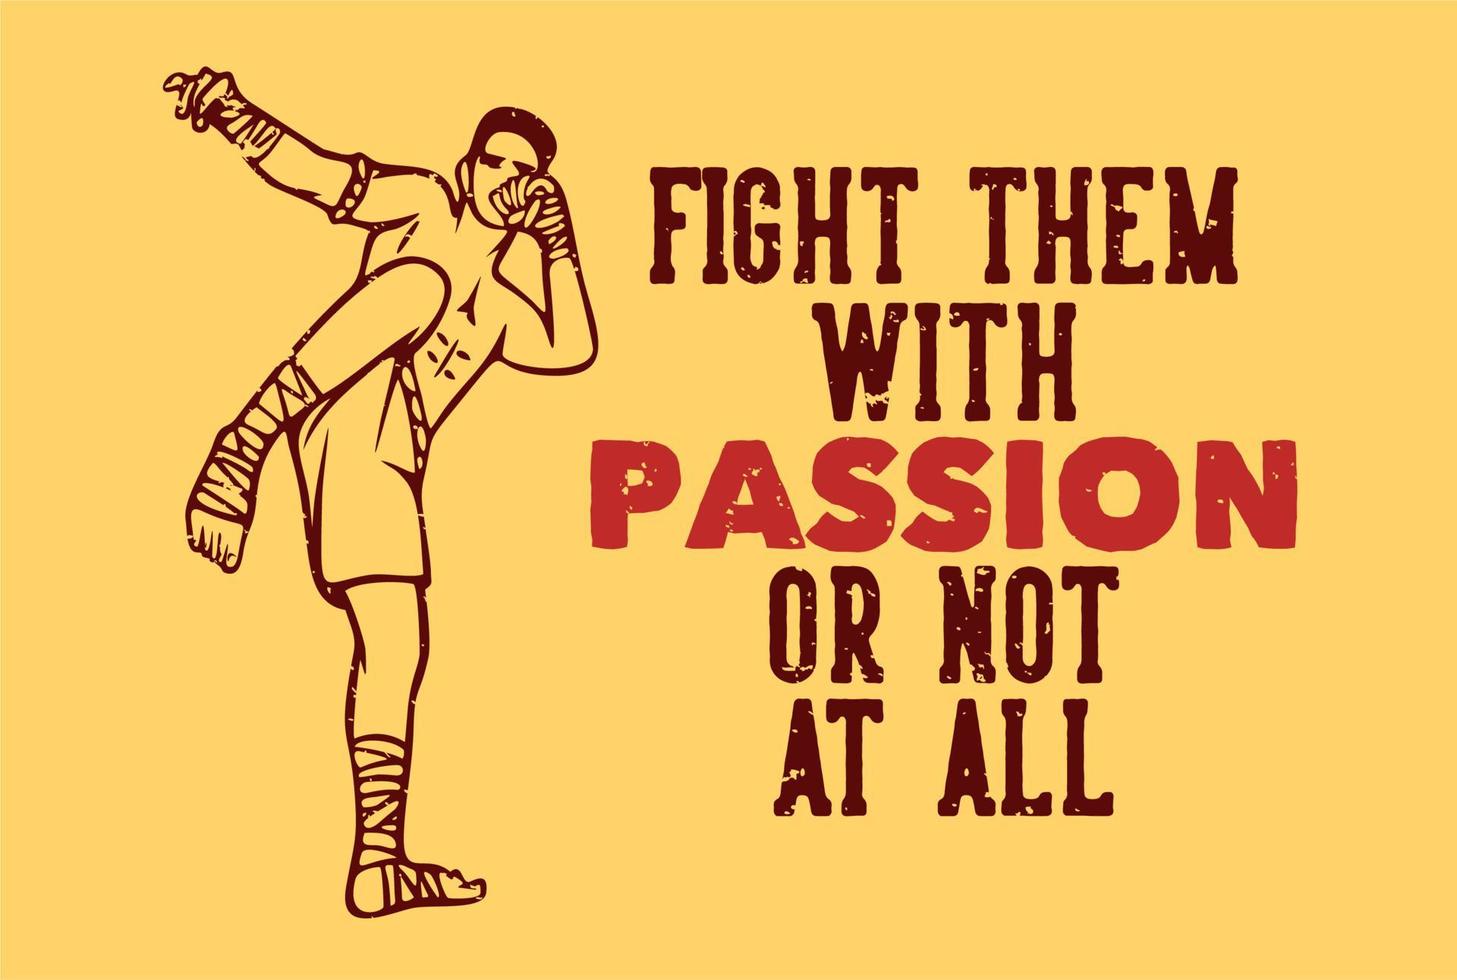 t shirt design fight them with passion or not at all with muay thai martial art artist vintage illustration vector